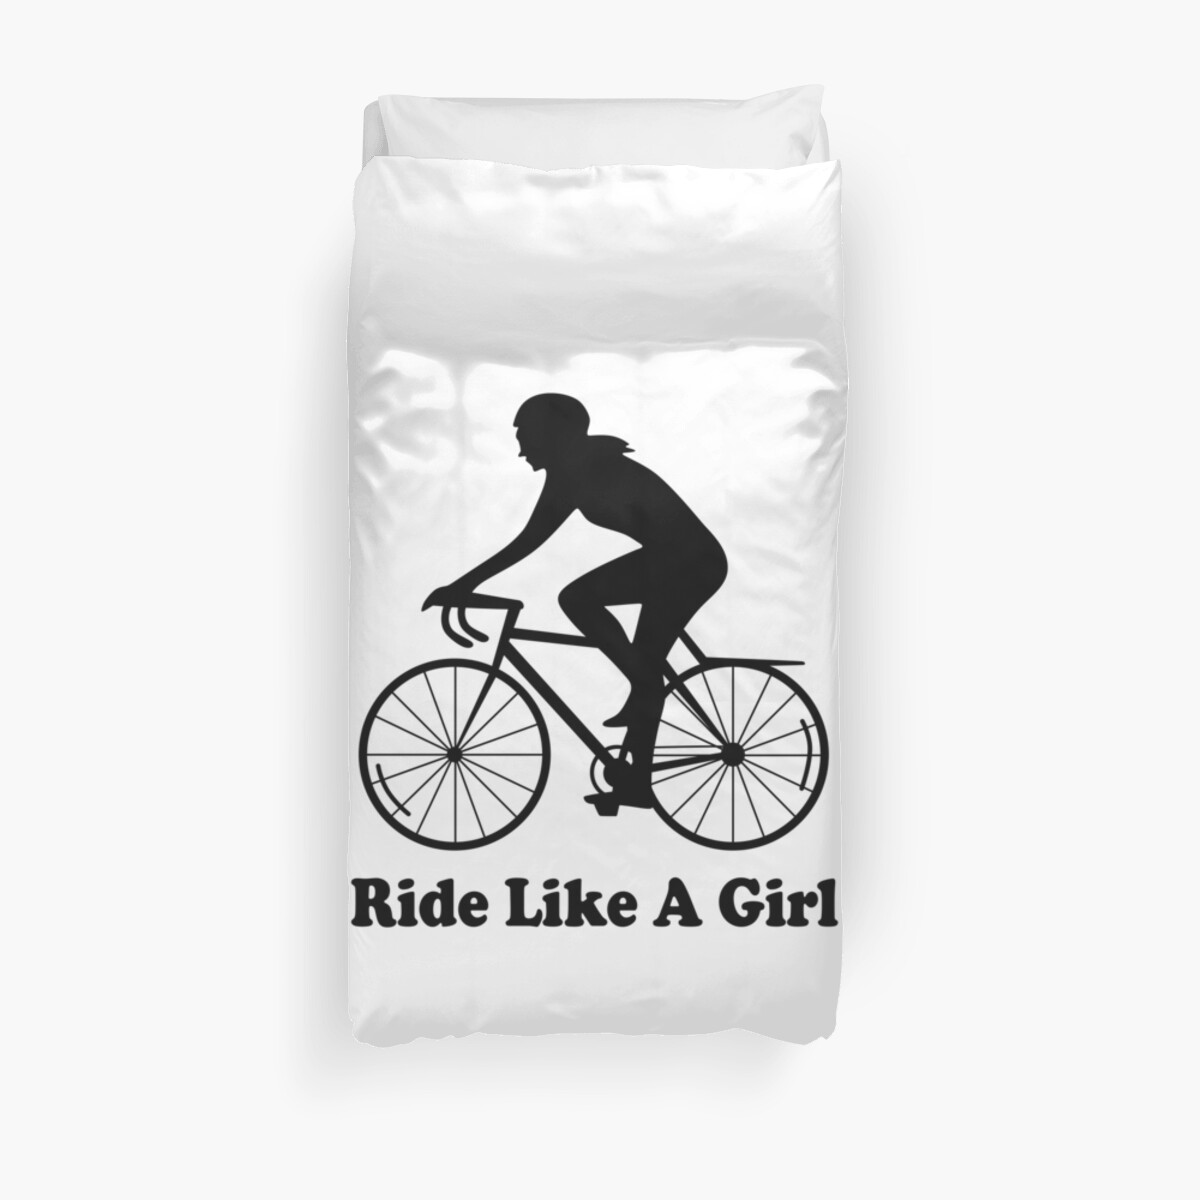 Ride Like A Girl Cycling Bicycle Duvet Cover By Gringoliath